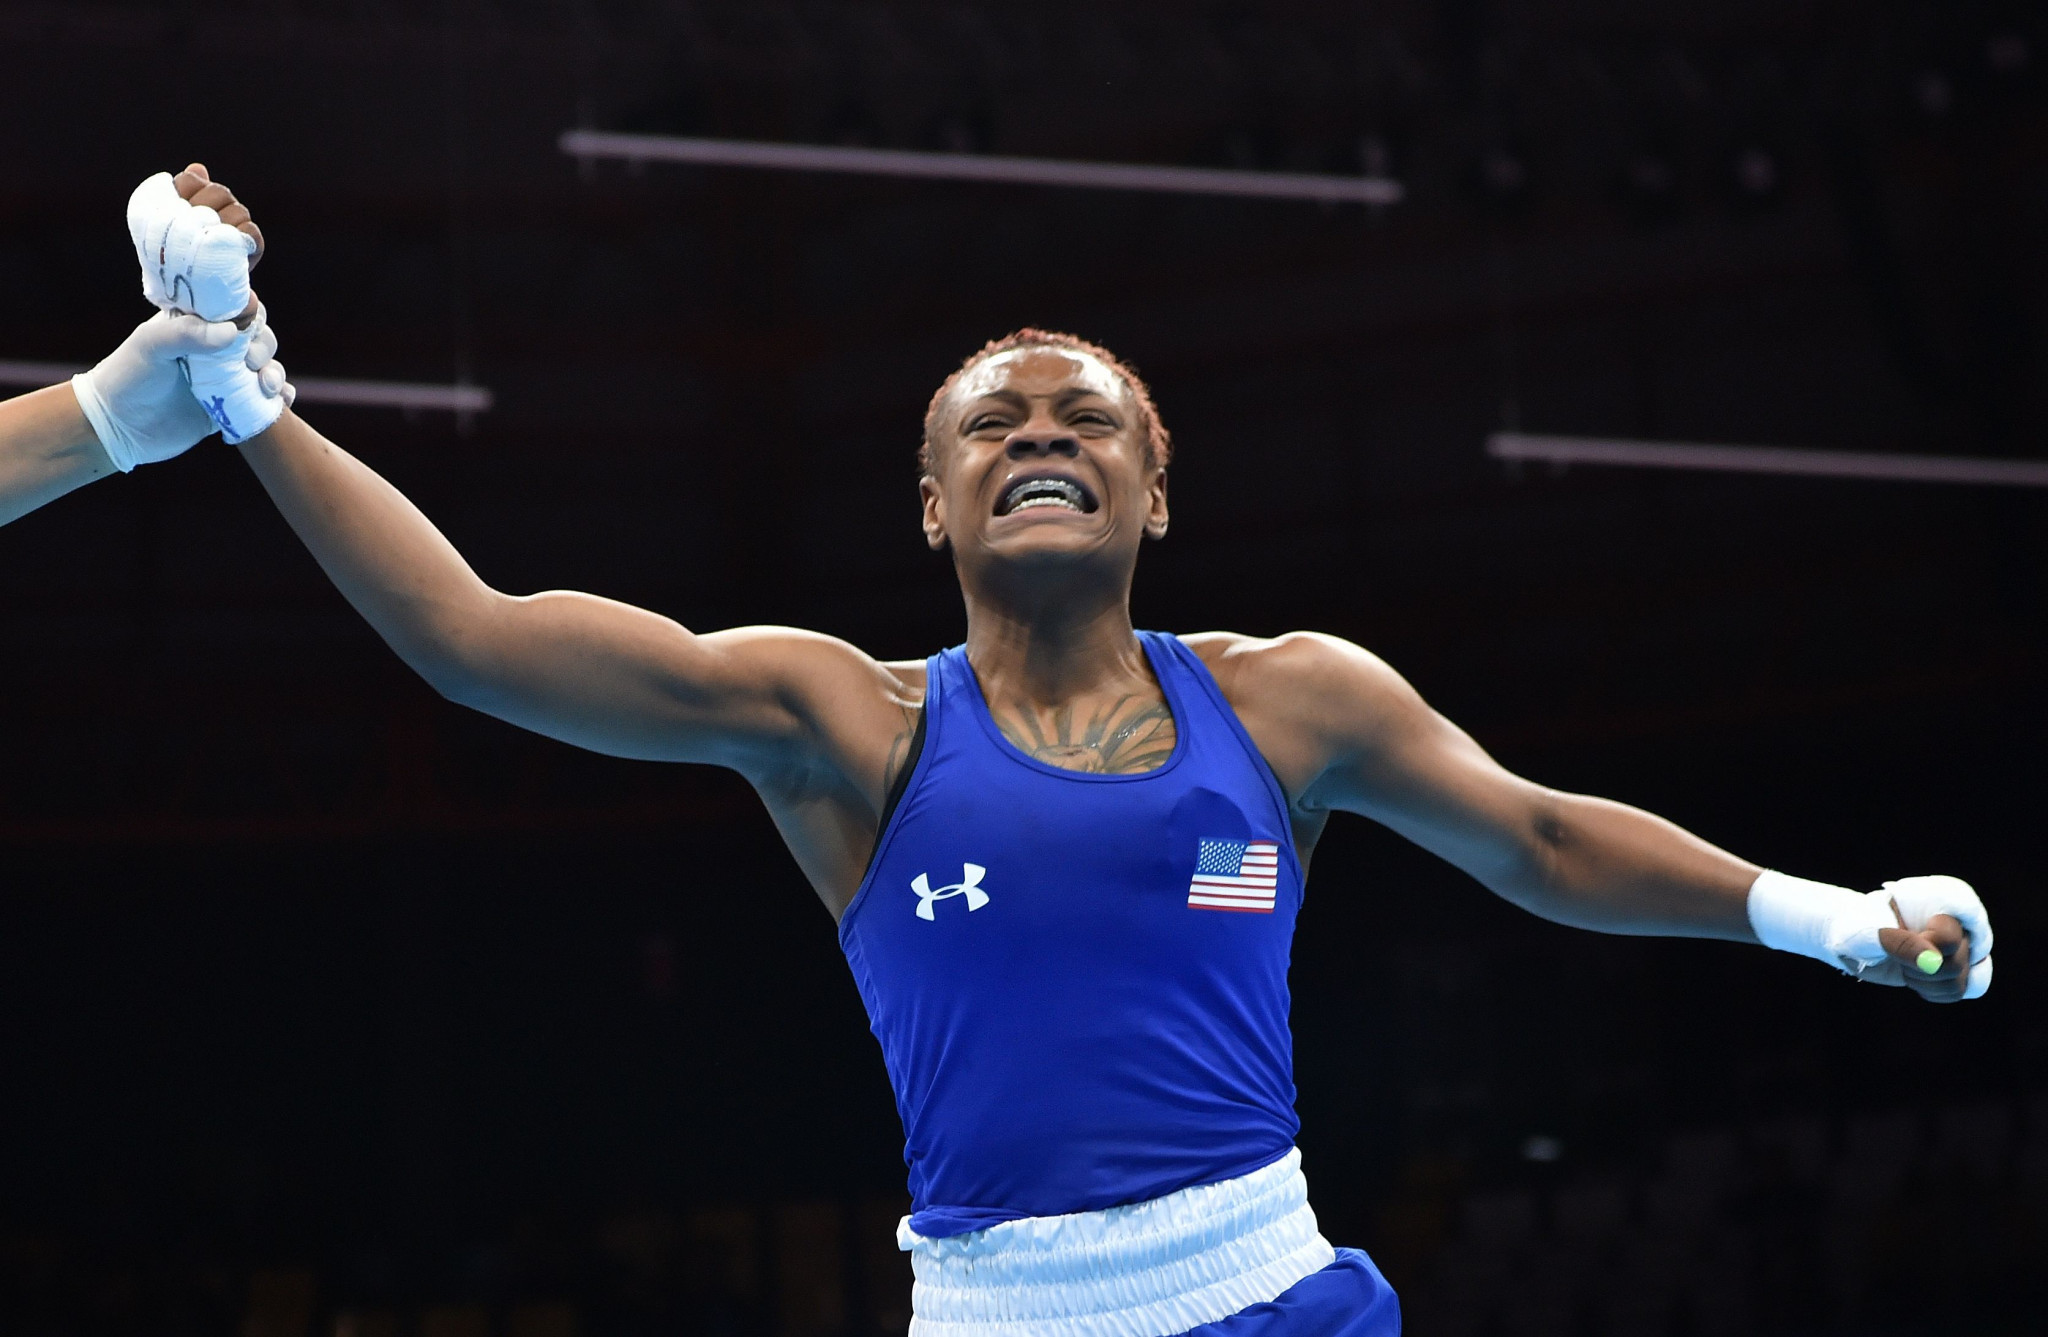 Pan American Games welterweight champion Oshae Jones won her first bout at the AIBA Women's World Championships ©Getty Images